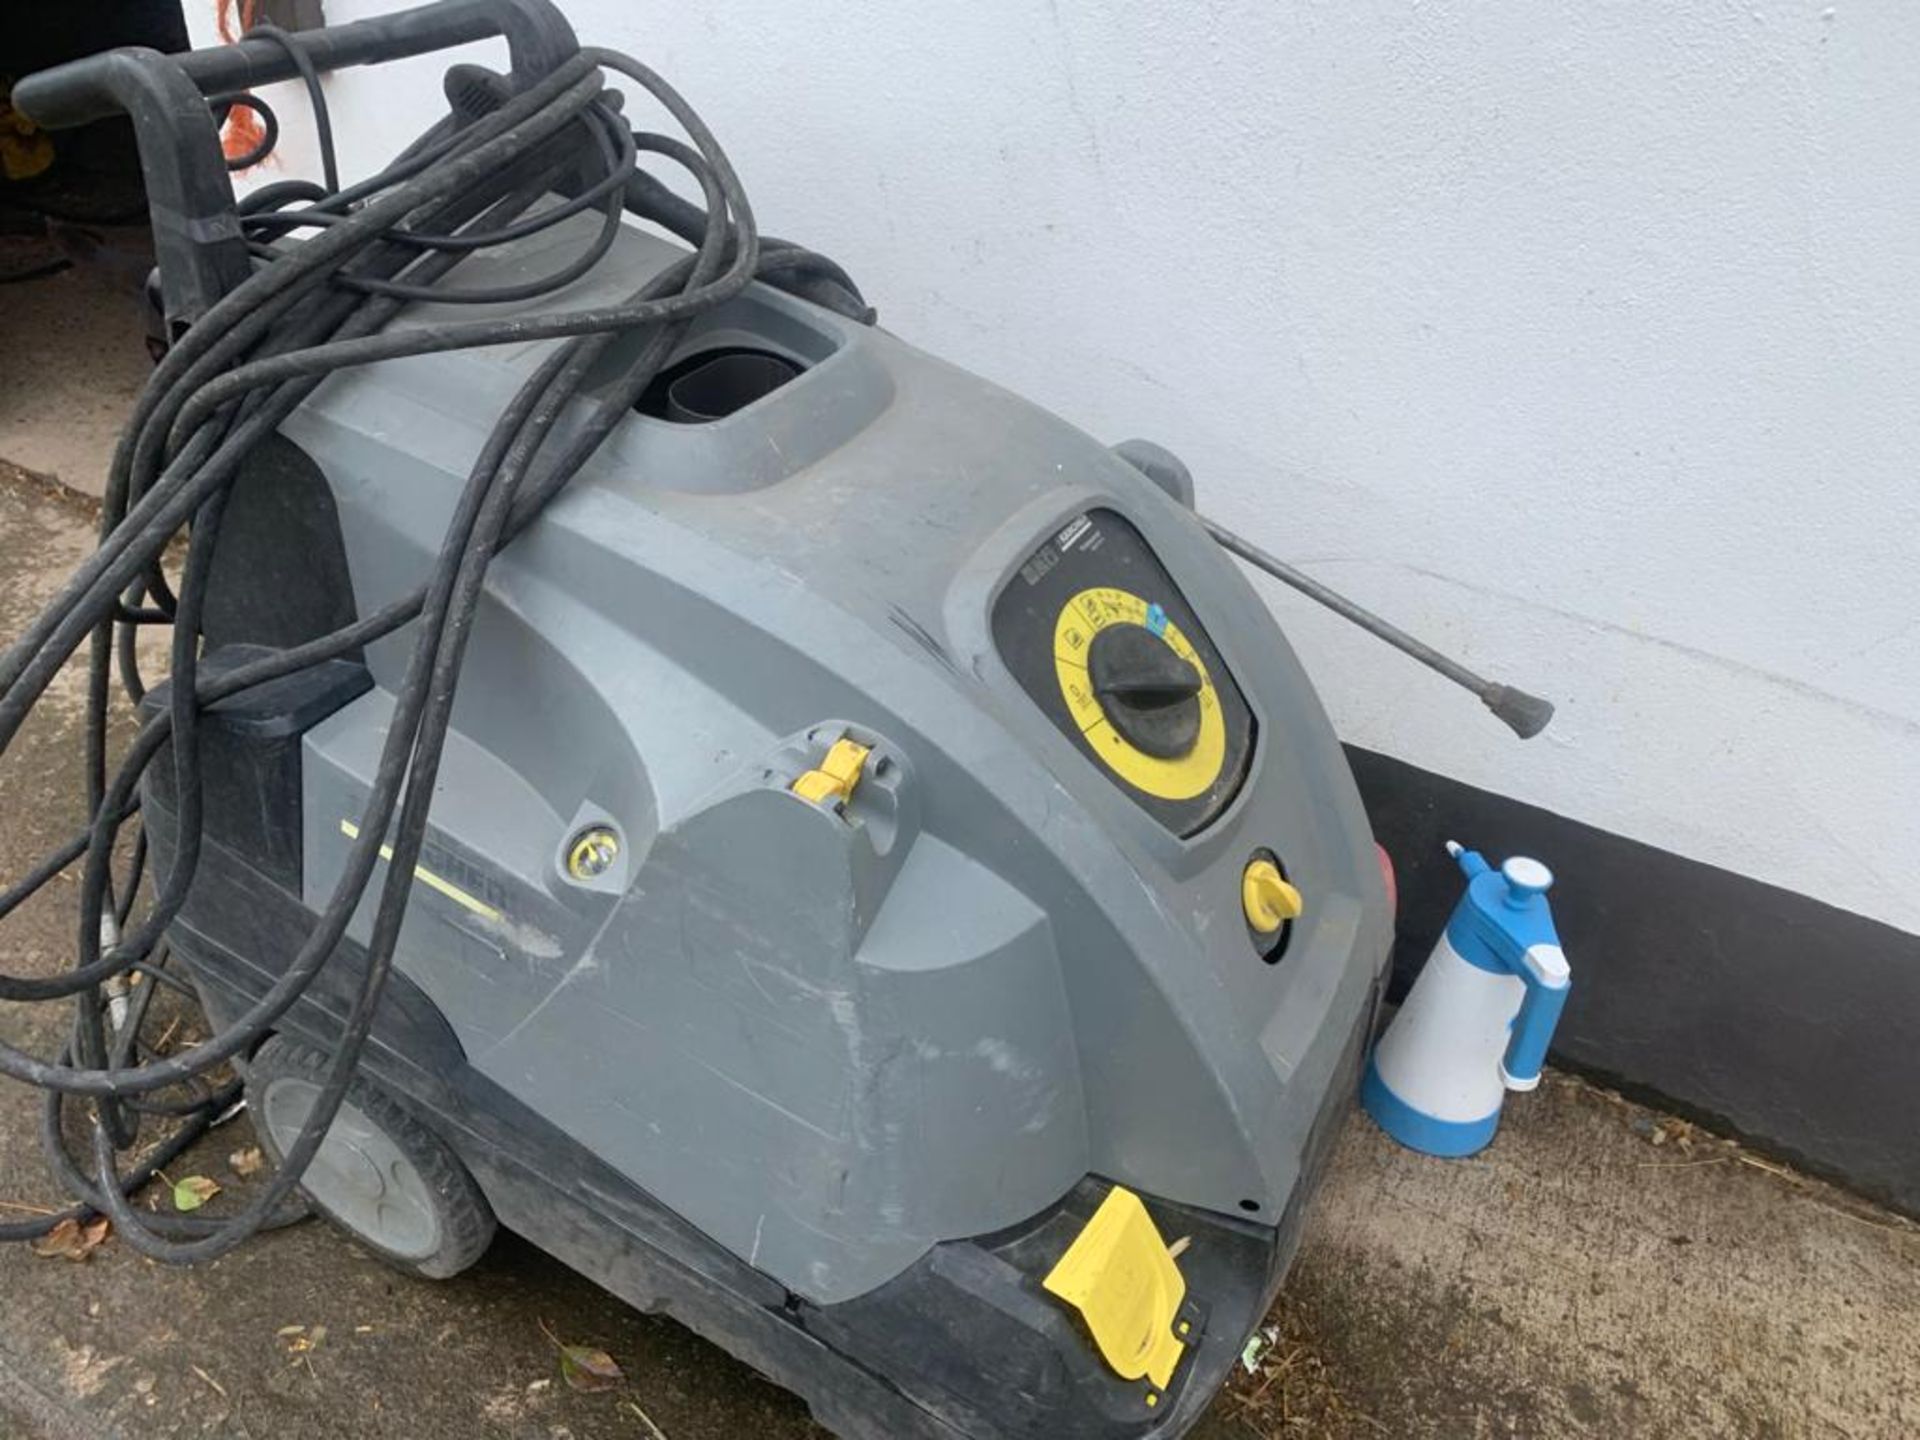 KARCHER POWER WASHER HOT AND COLD LOCATION N IRELAND